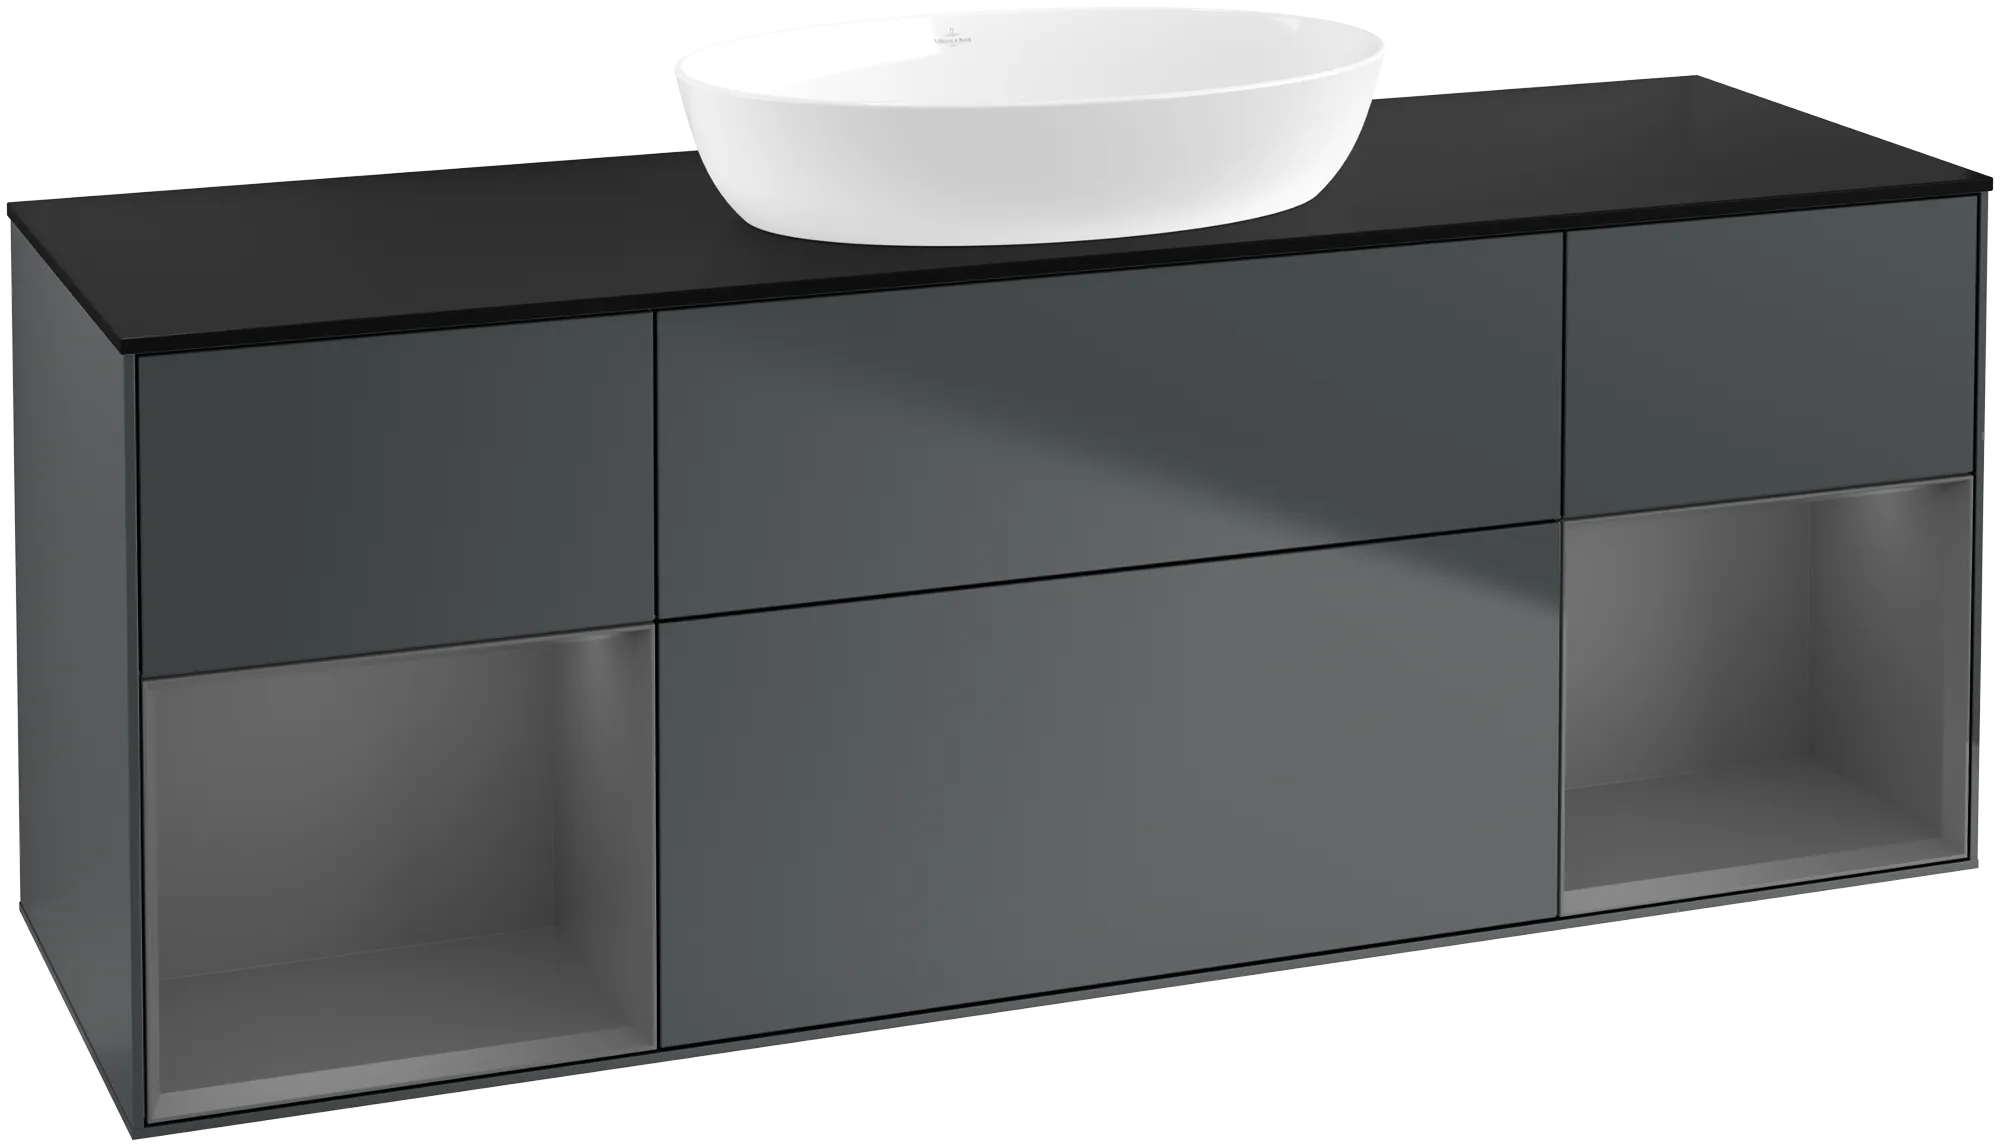 Picture of VILLEROY BOCH Finion Vanity unit, with lighting, 4 pull-out compartments, 1600 x 603 x 501 mm, Midnight Blue Matt Lacquer / Anthracite Matt Lacquer / Glass Black Matt #GD02GKHG